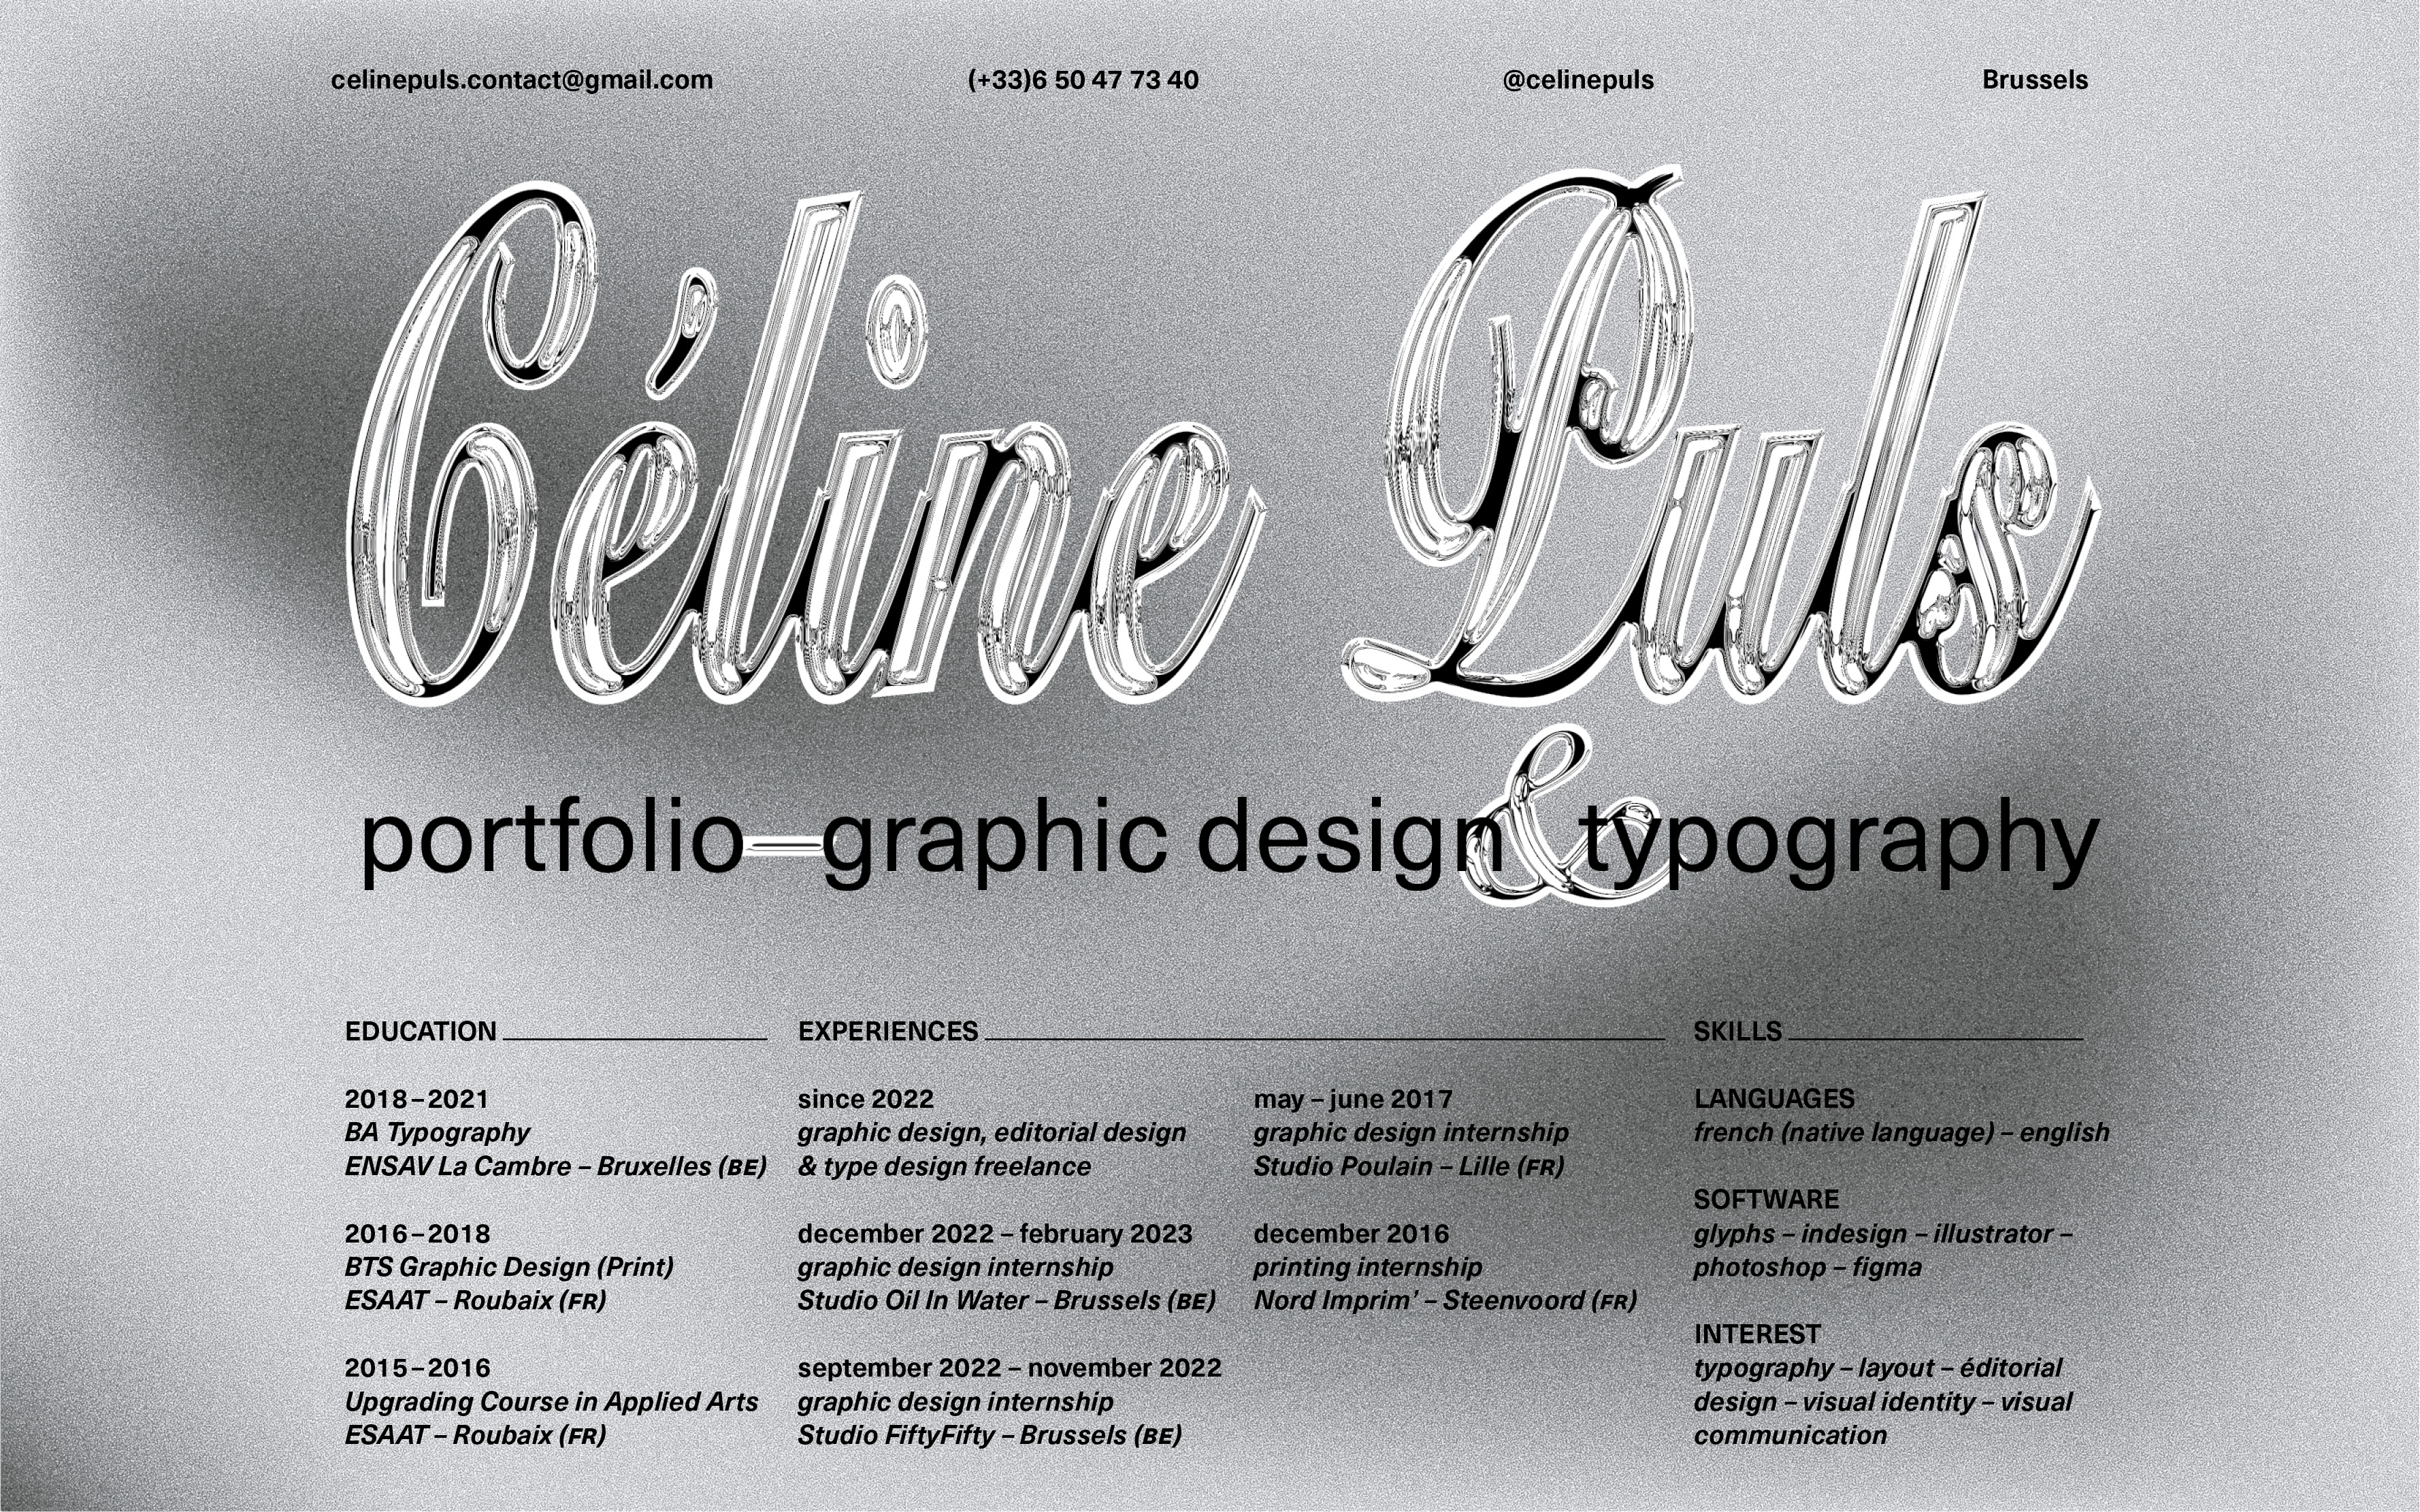 @celinepuls Brussels

EDUCATION

2018-2021
BA Typography graphic design, editor
ENSAV La Cambre - Bruxelles (BE) &amp; type design freelanc

 

2016-2018
BTS Graphic Design (Print)
ESAAT - Roubaix (FR)

    
   
     
   

Studio Oil In Water
2015-2016 september 2022 - nove
Upgrading Course in Applied Arts graphic design internship

ESAAT - Roubaix (FR) Studio FiftyFifty - Brussels (BE) ommunication